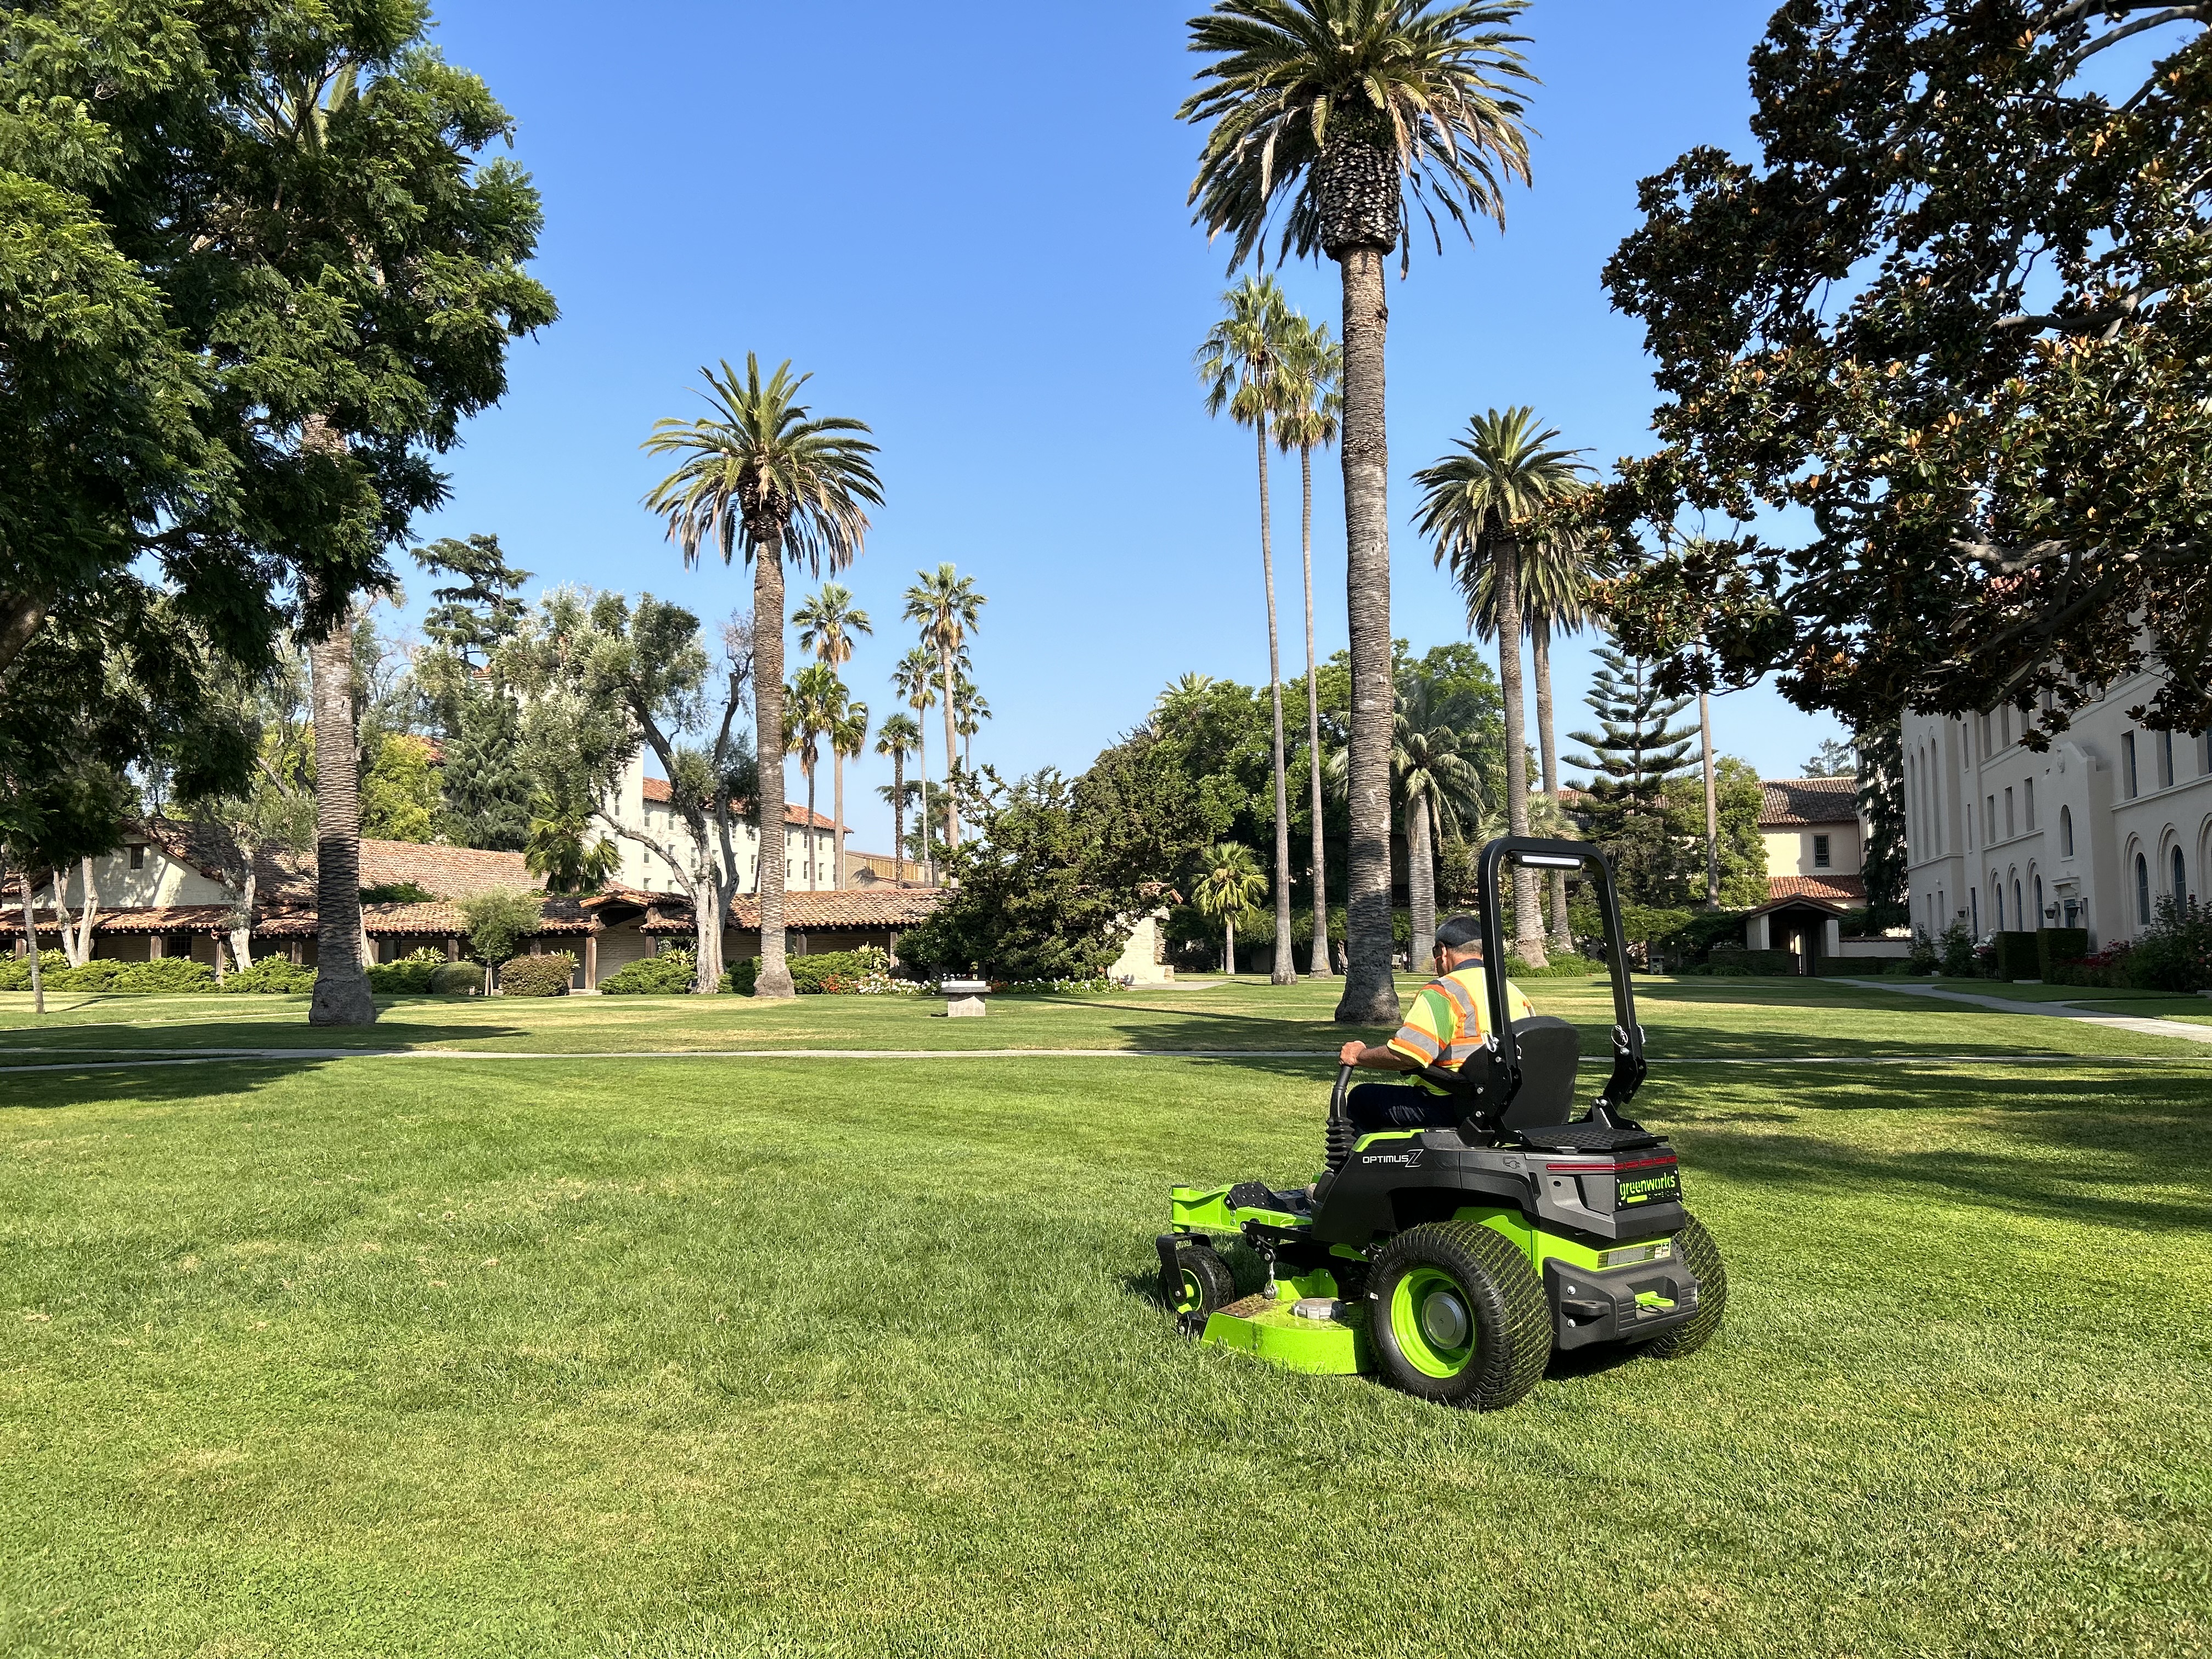 person on electric lawn mower in front of blue skies and palm trees on campus